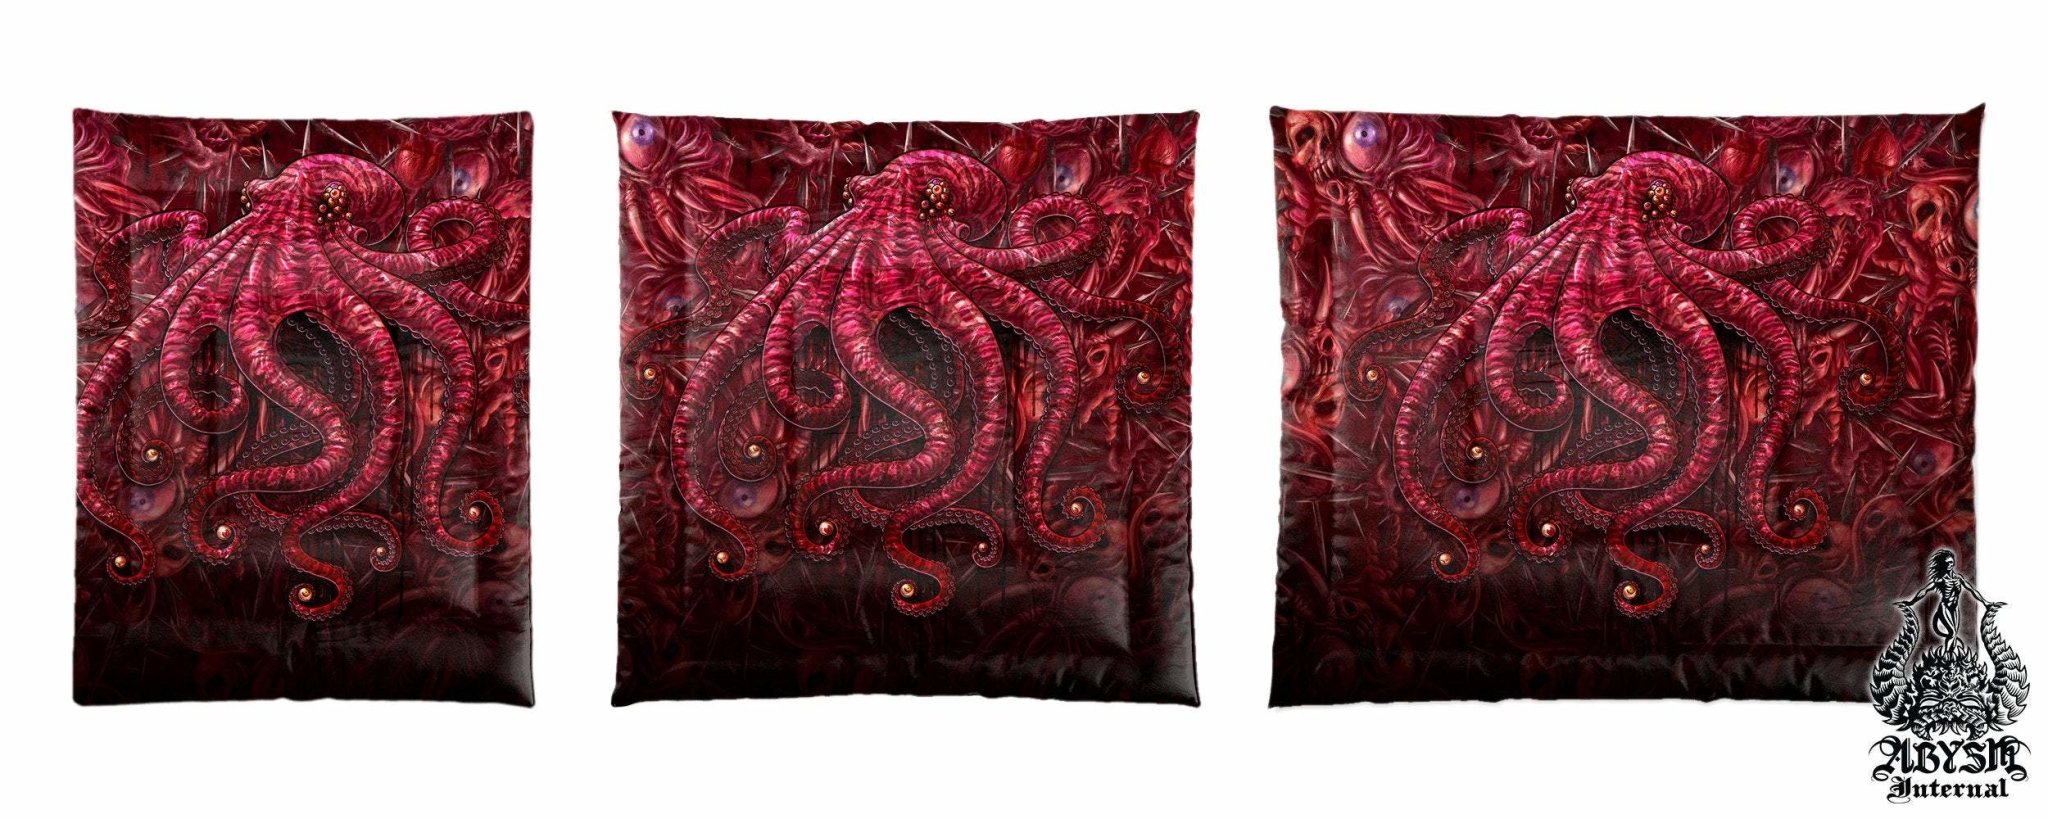 Horror Bedding Set, Comforter and Duvet, Monster Octopus, Halloween Bed Cover and Beach Bedroom Decor, King, Queen and Twin Size - Gore and Blood - Abysm Internal